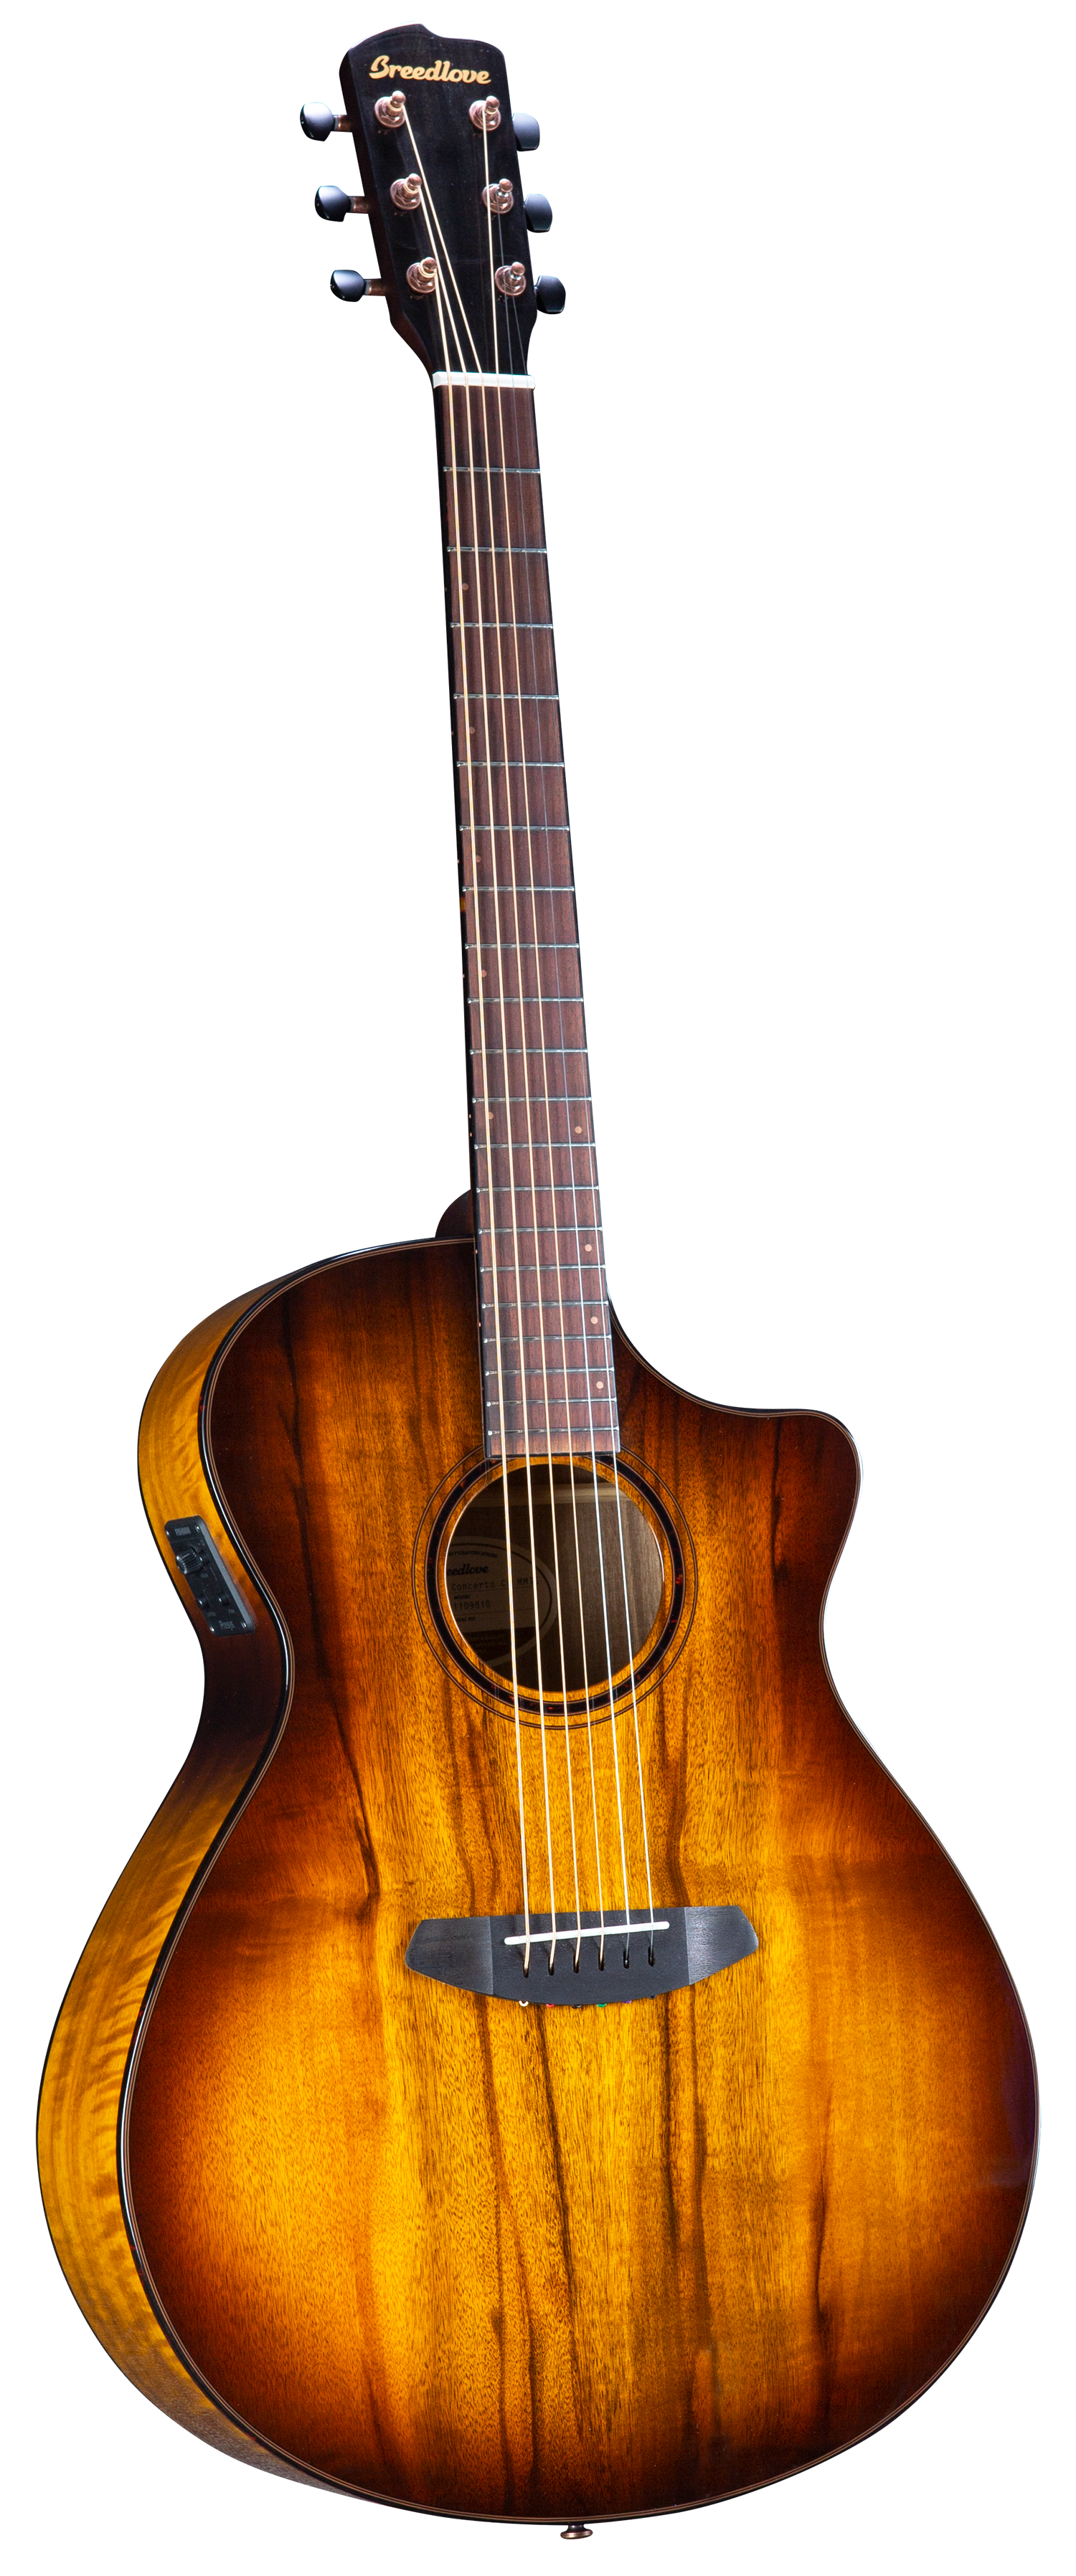 Breedlove Eco Pursuit Exotic S Concerto CE Acoustic Electric Guitar - Tiger's Eye